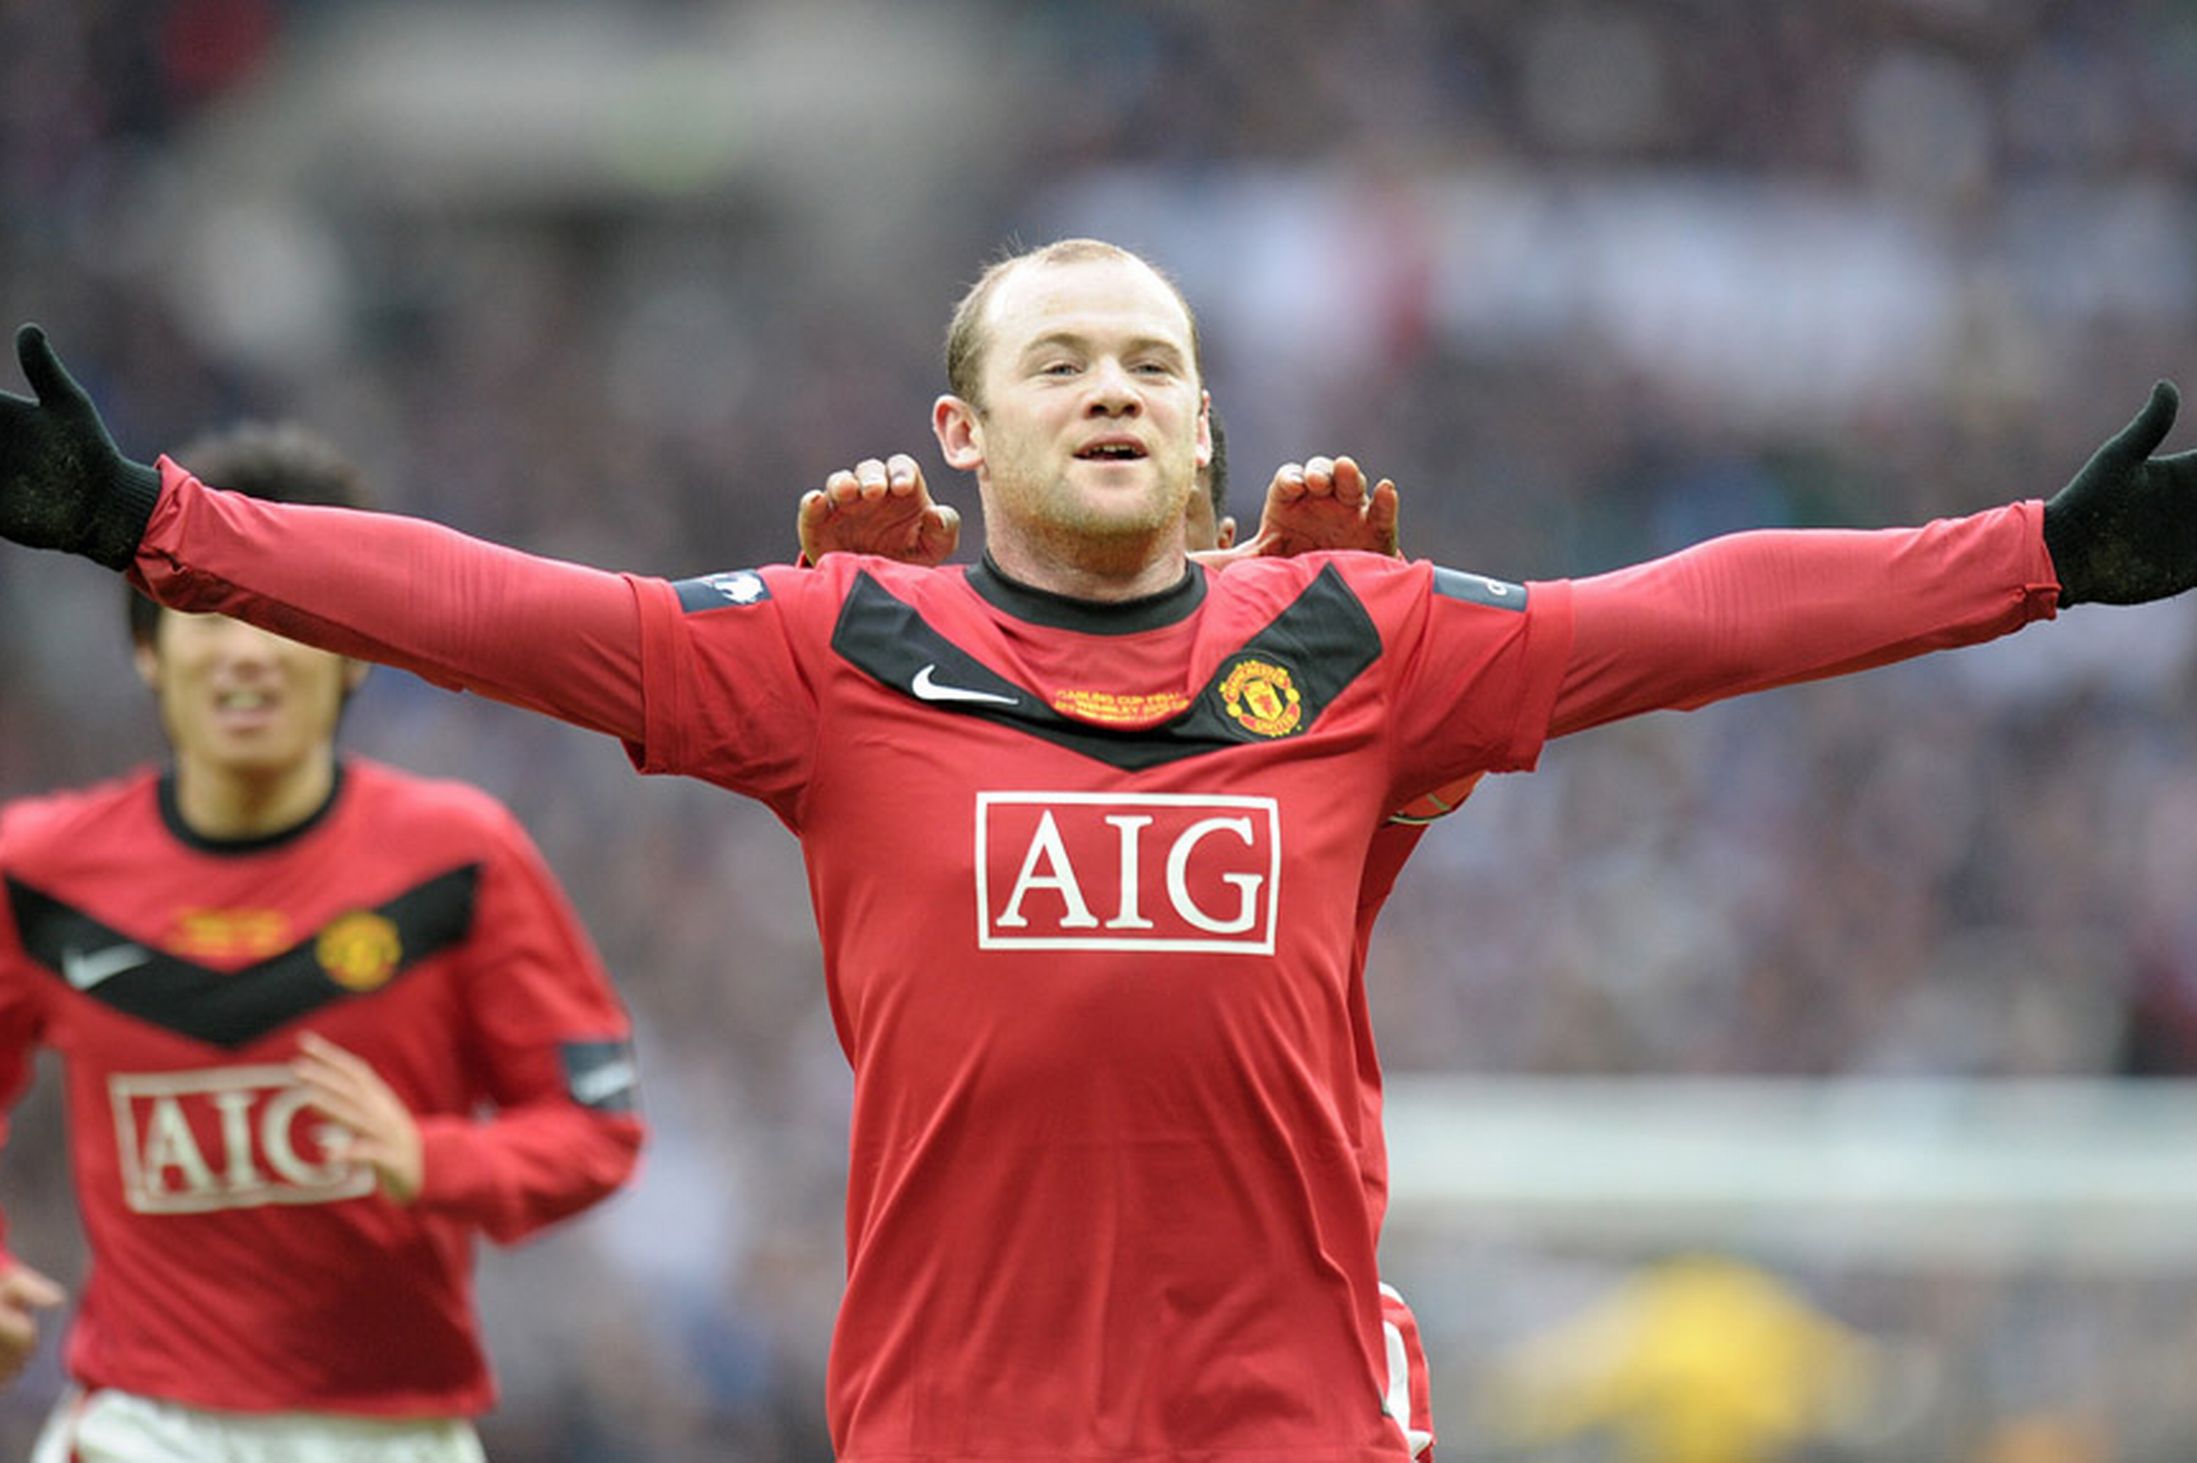 The best player of Manchester United Wayne Rooney wallpapers and images